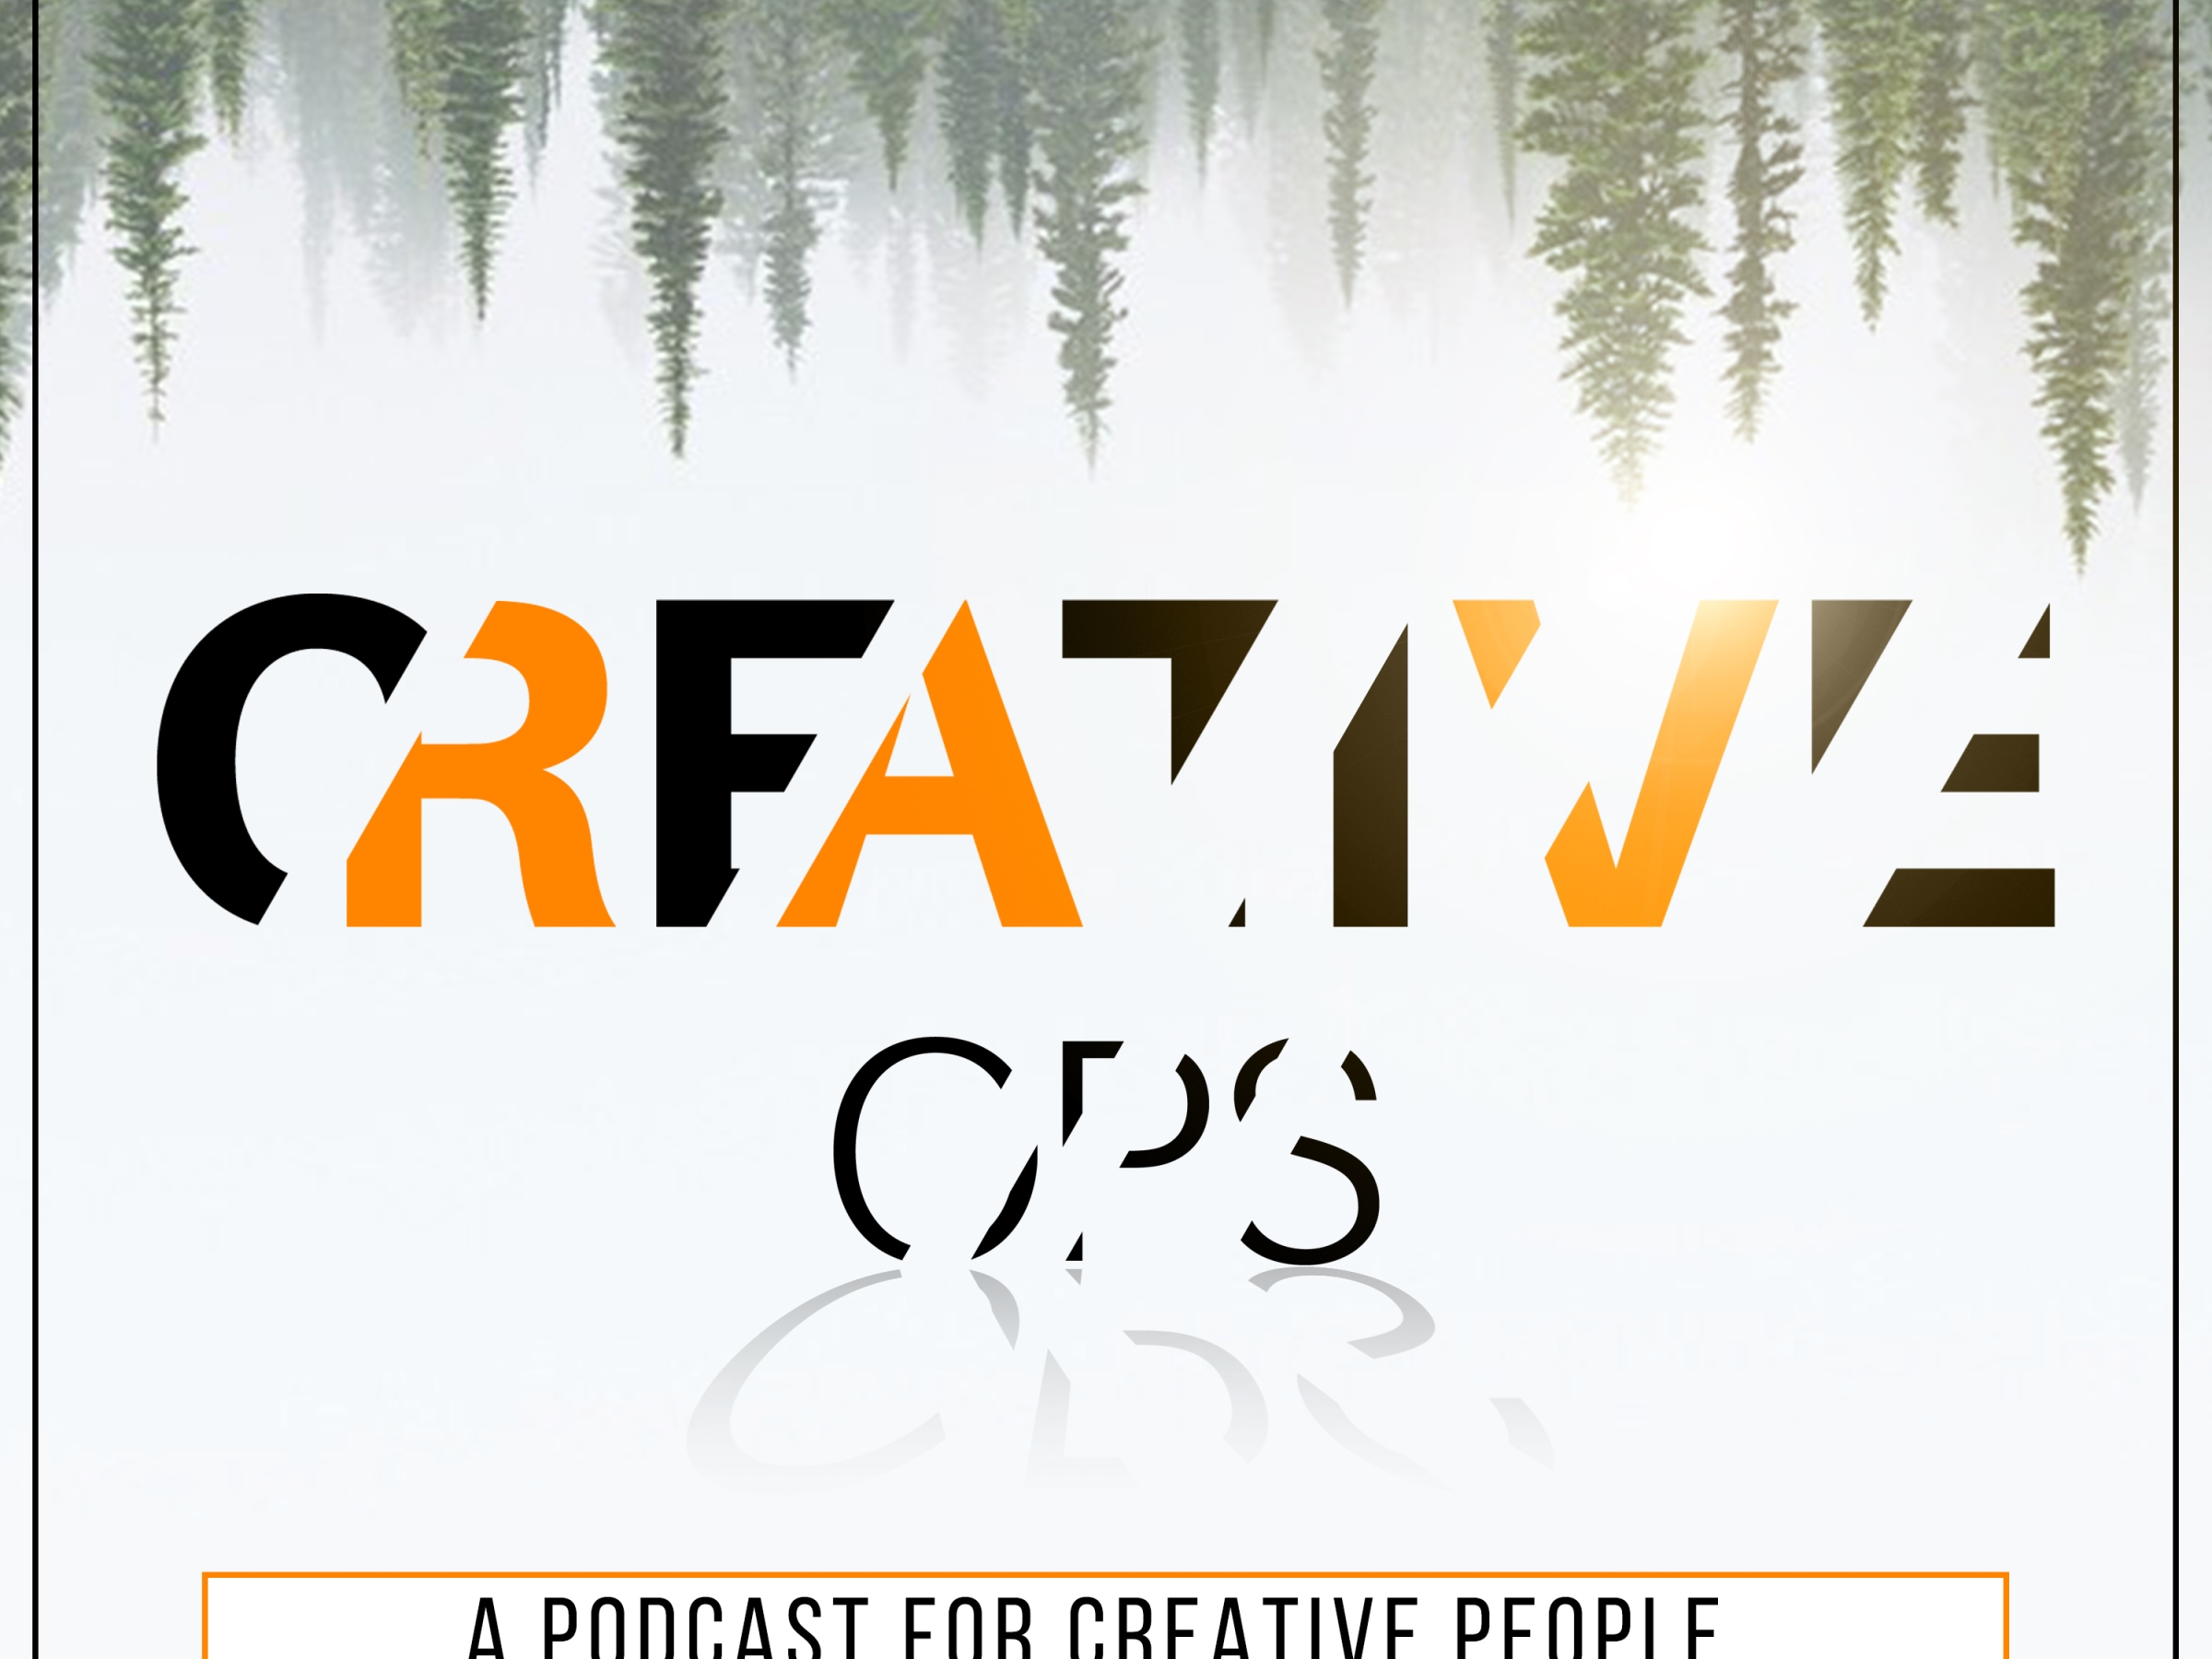 a podcast for creative people, by creative people